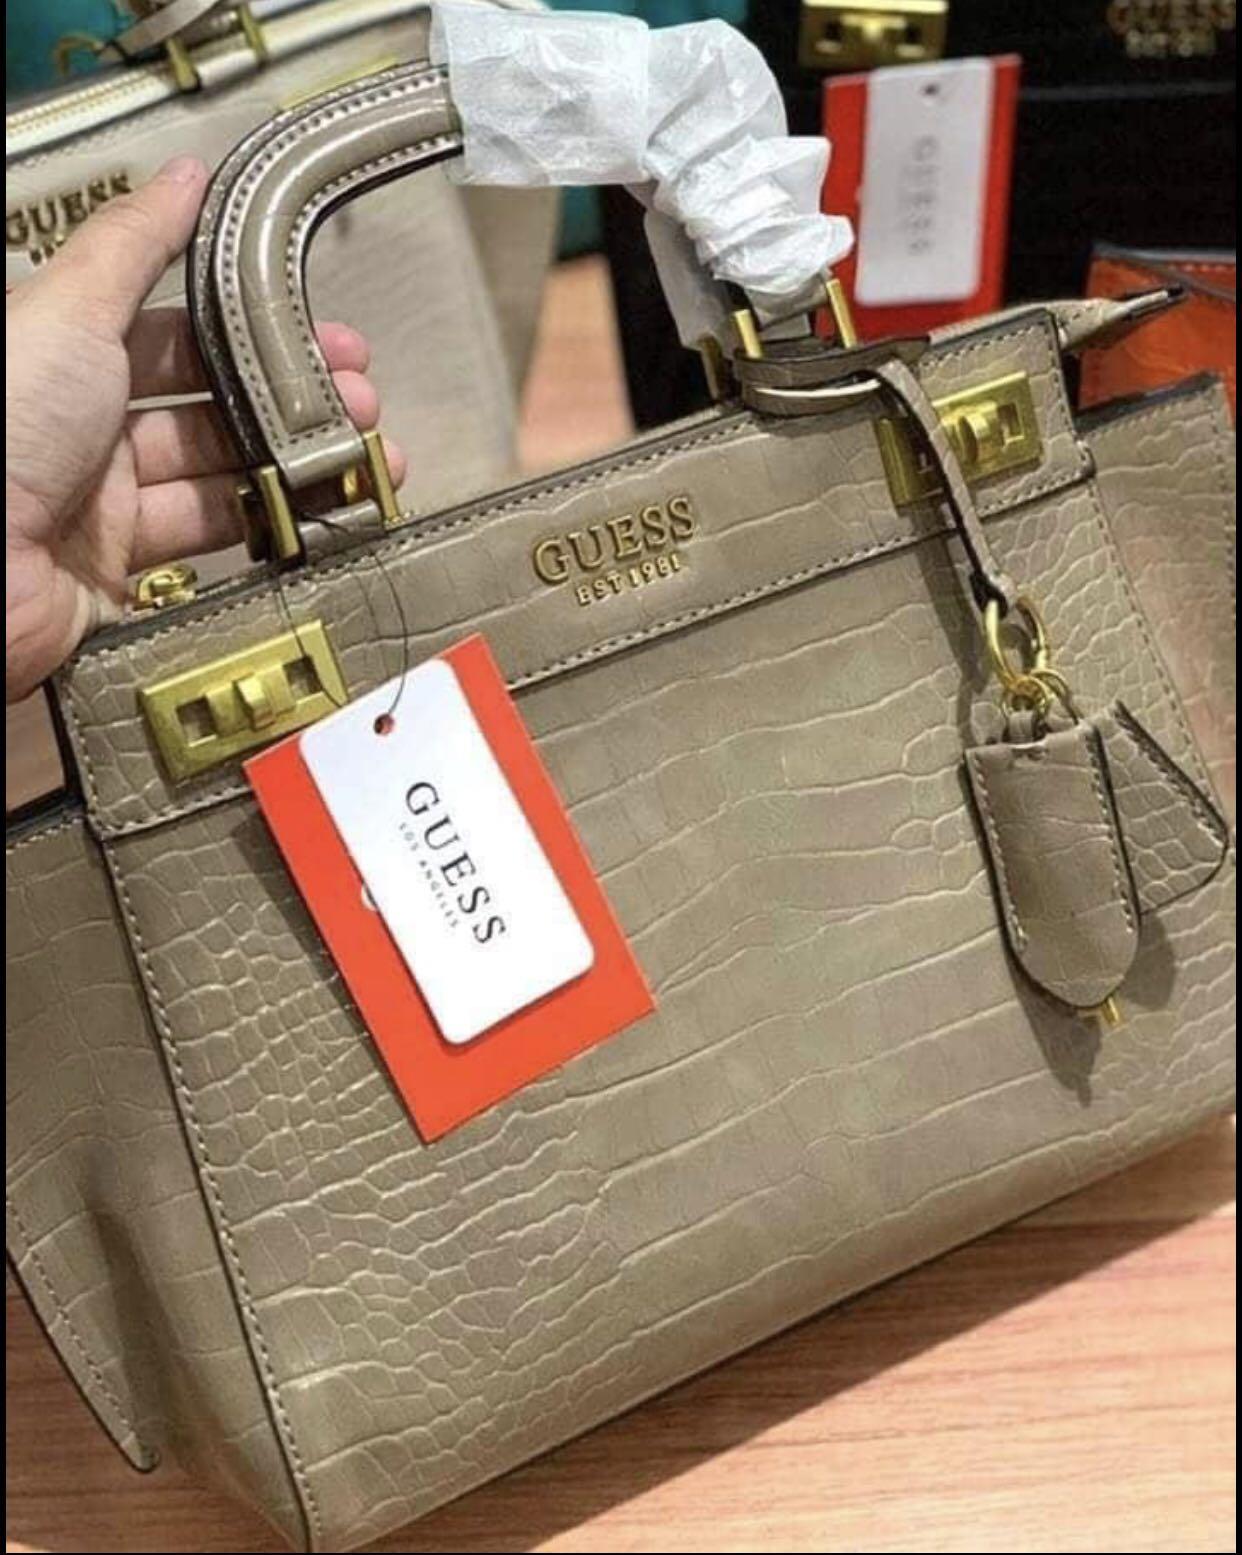 GUESS KATEY LUXURY SATCHEL BAG, UNBOXING + REVIEW